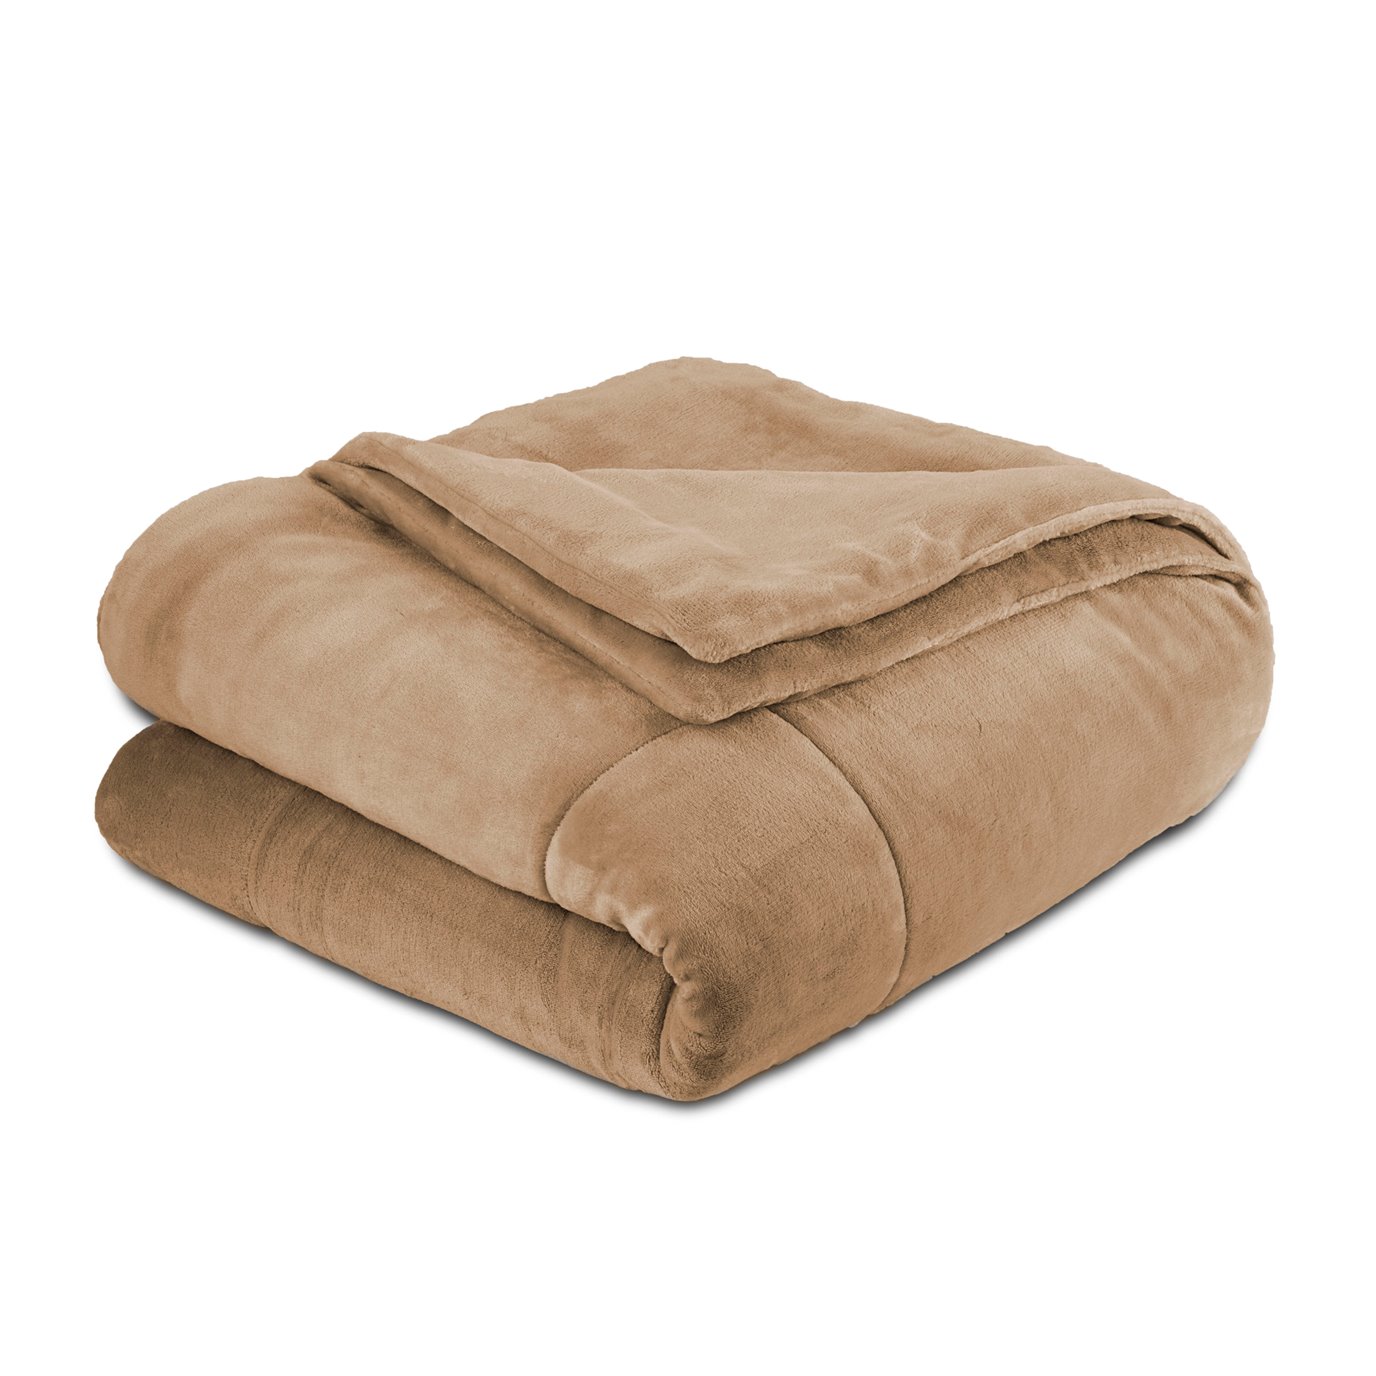 Vellux PlushLux Filled Full/Queen Sand Blanket